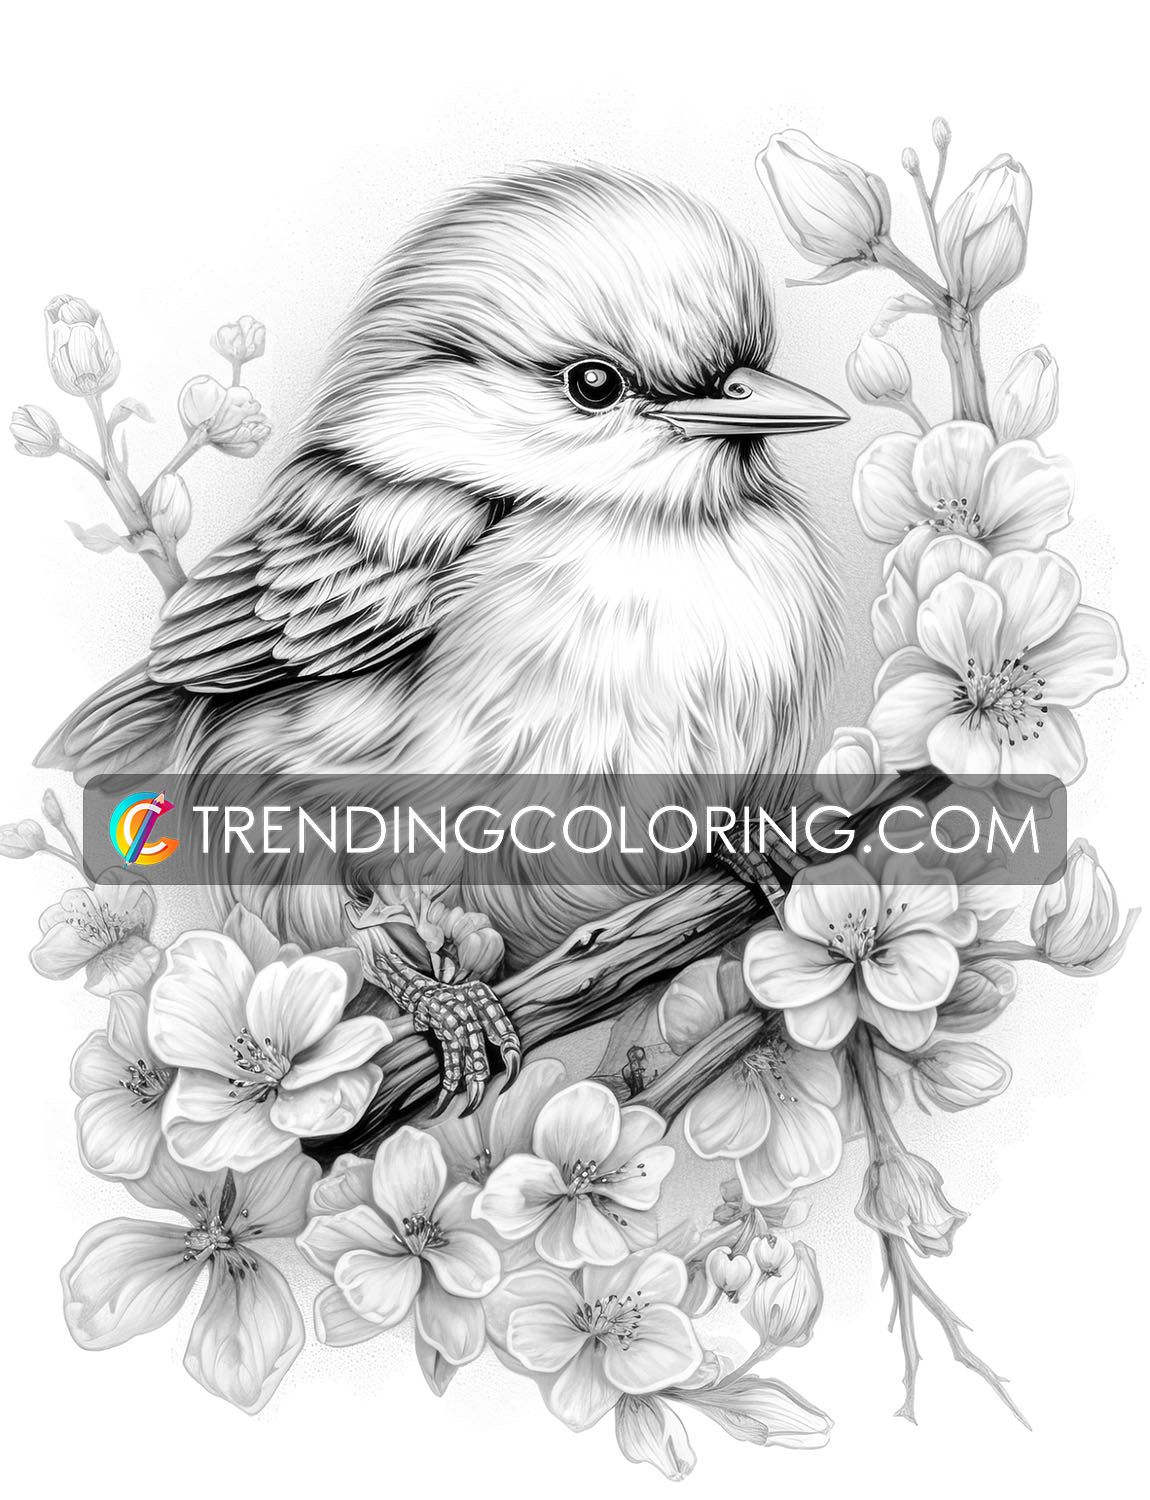 25 Baby Cute Animal Grayscale Coloring Pages - Instant Download - Printable